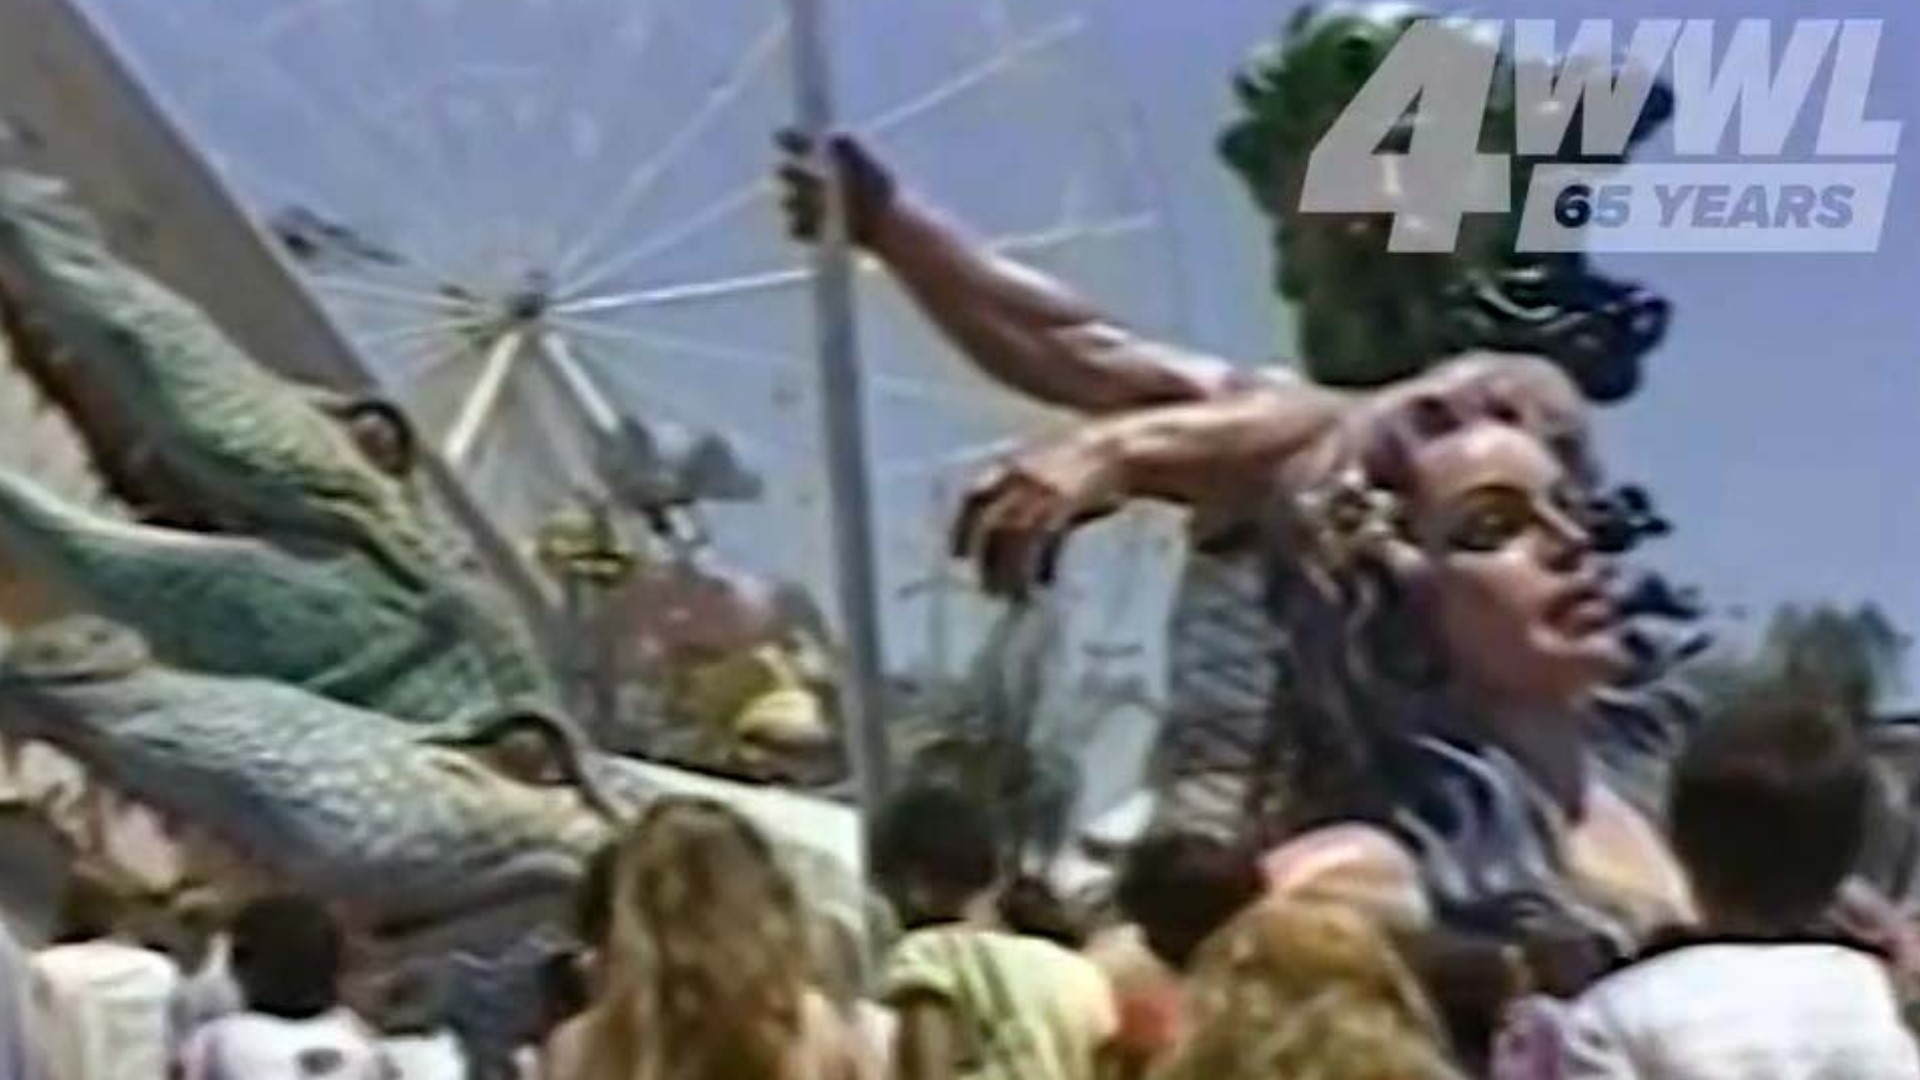 Looking back at WWL-TV's coverage of the Worlds Fair in New Orleans.